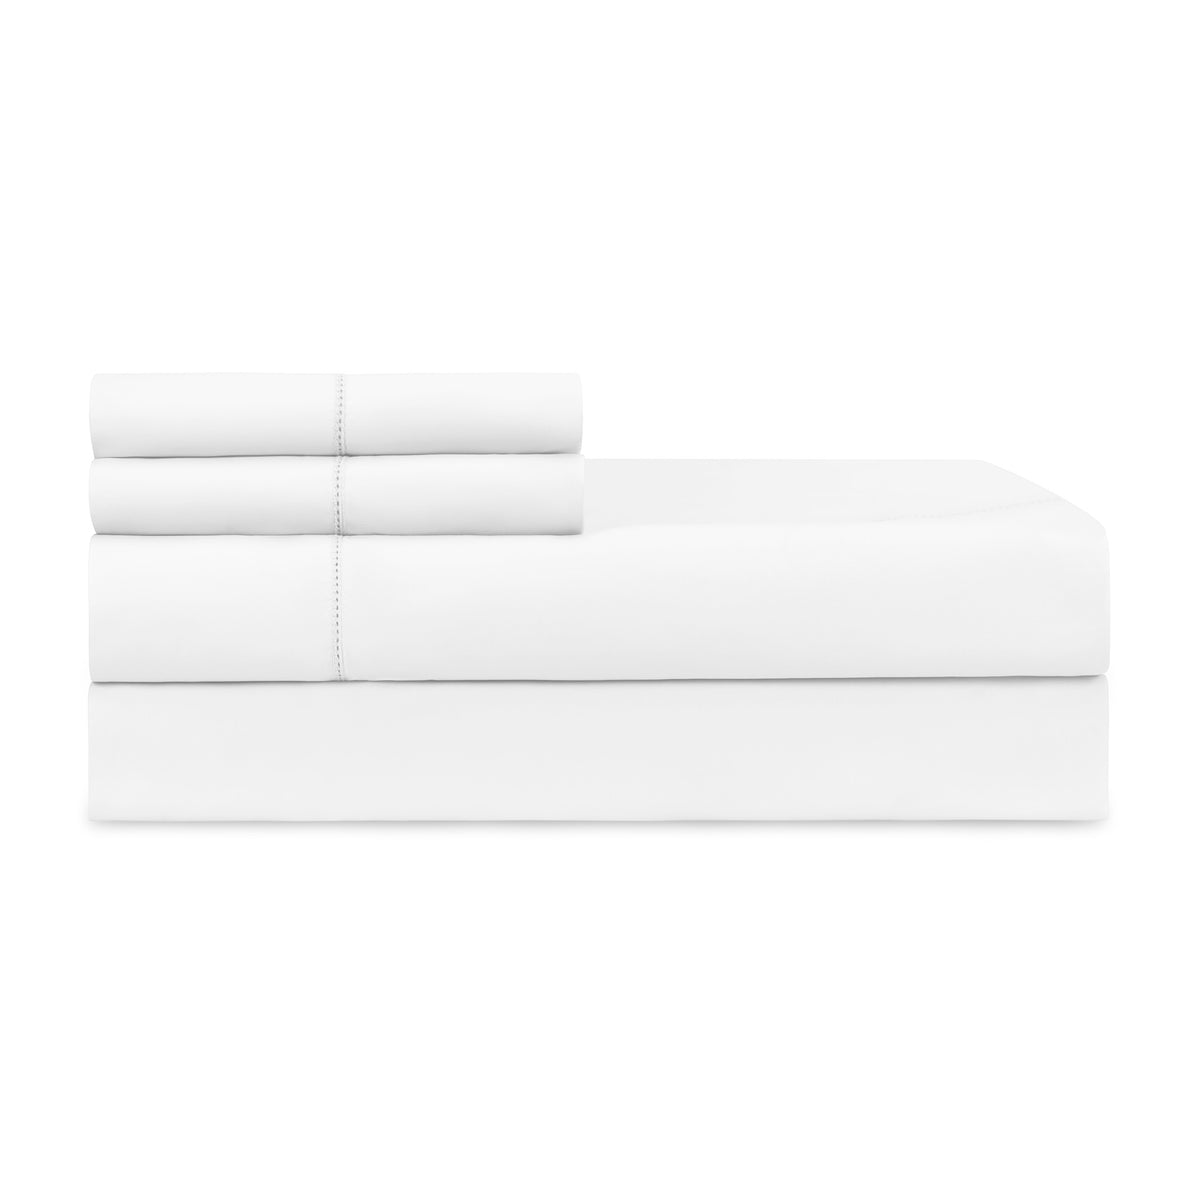 Sheet Set of Home Treasures Perla Percale Bedding in White Color